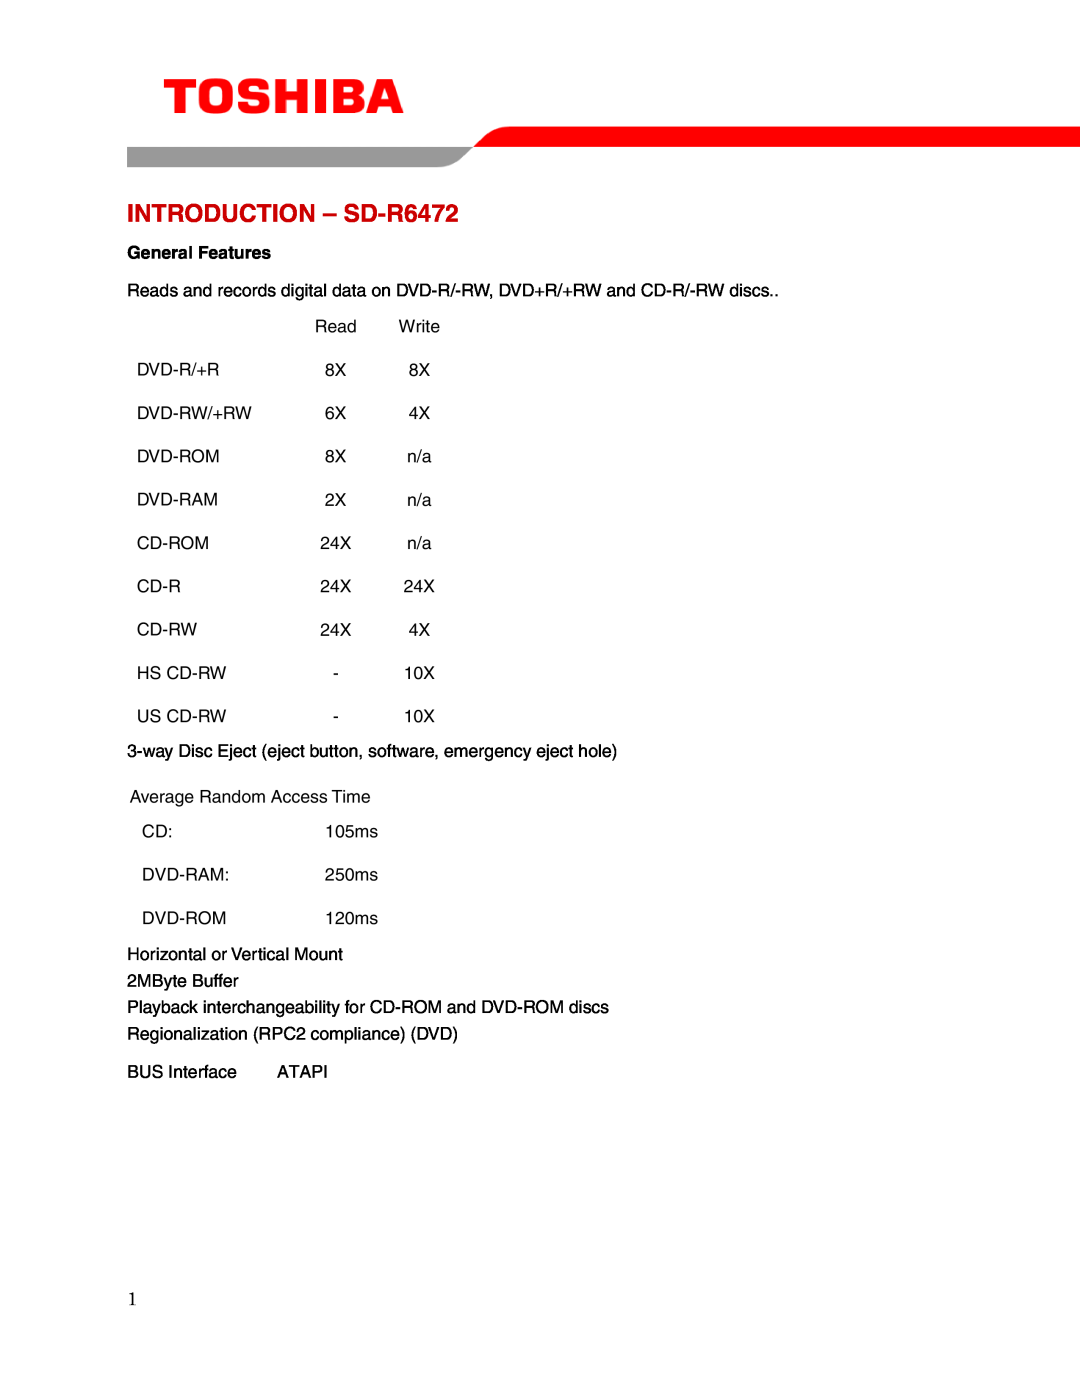 Toshiba user manual INTRODUCTION - SD-R6472, General Features 